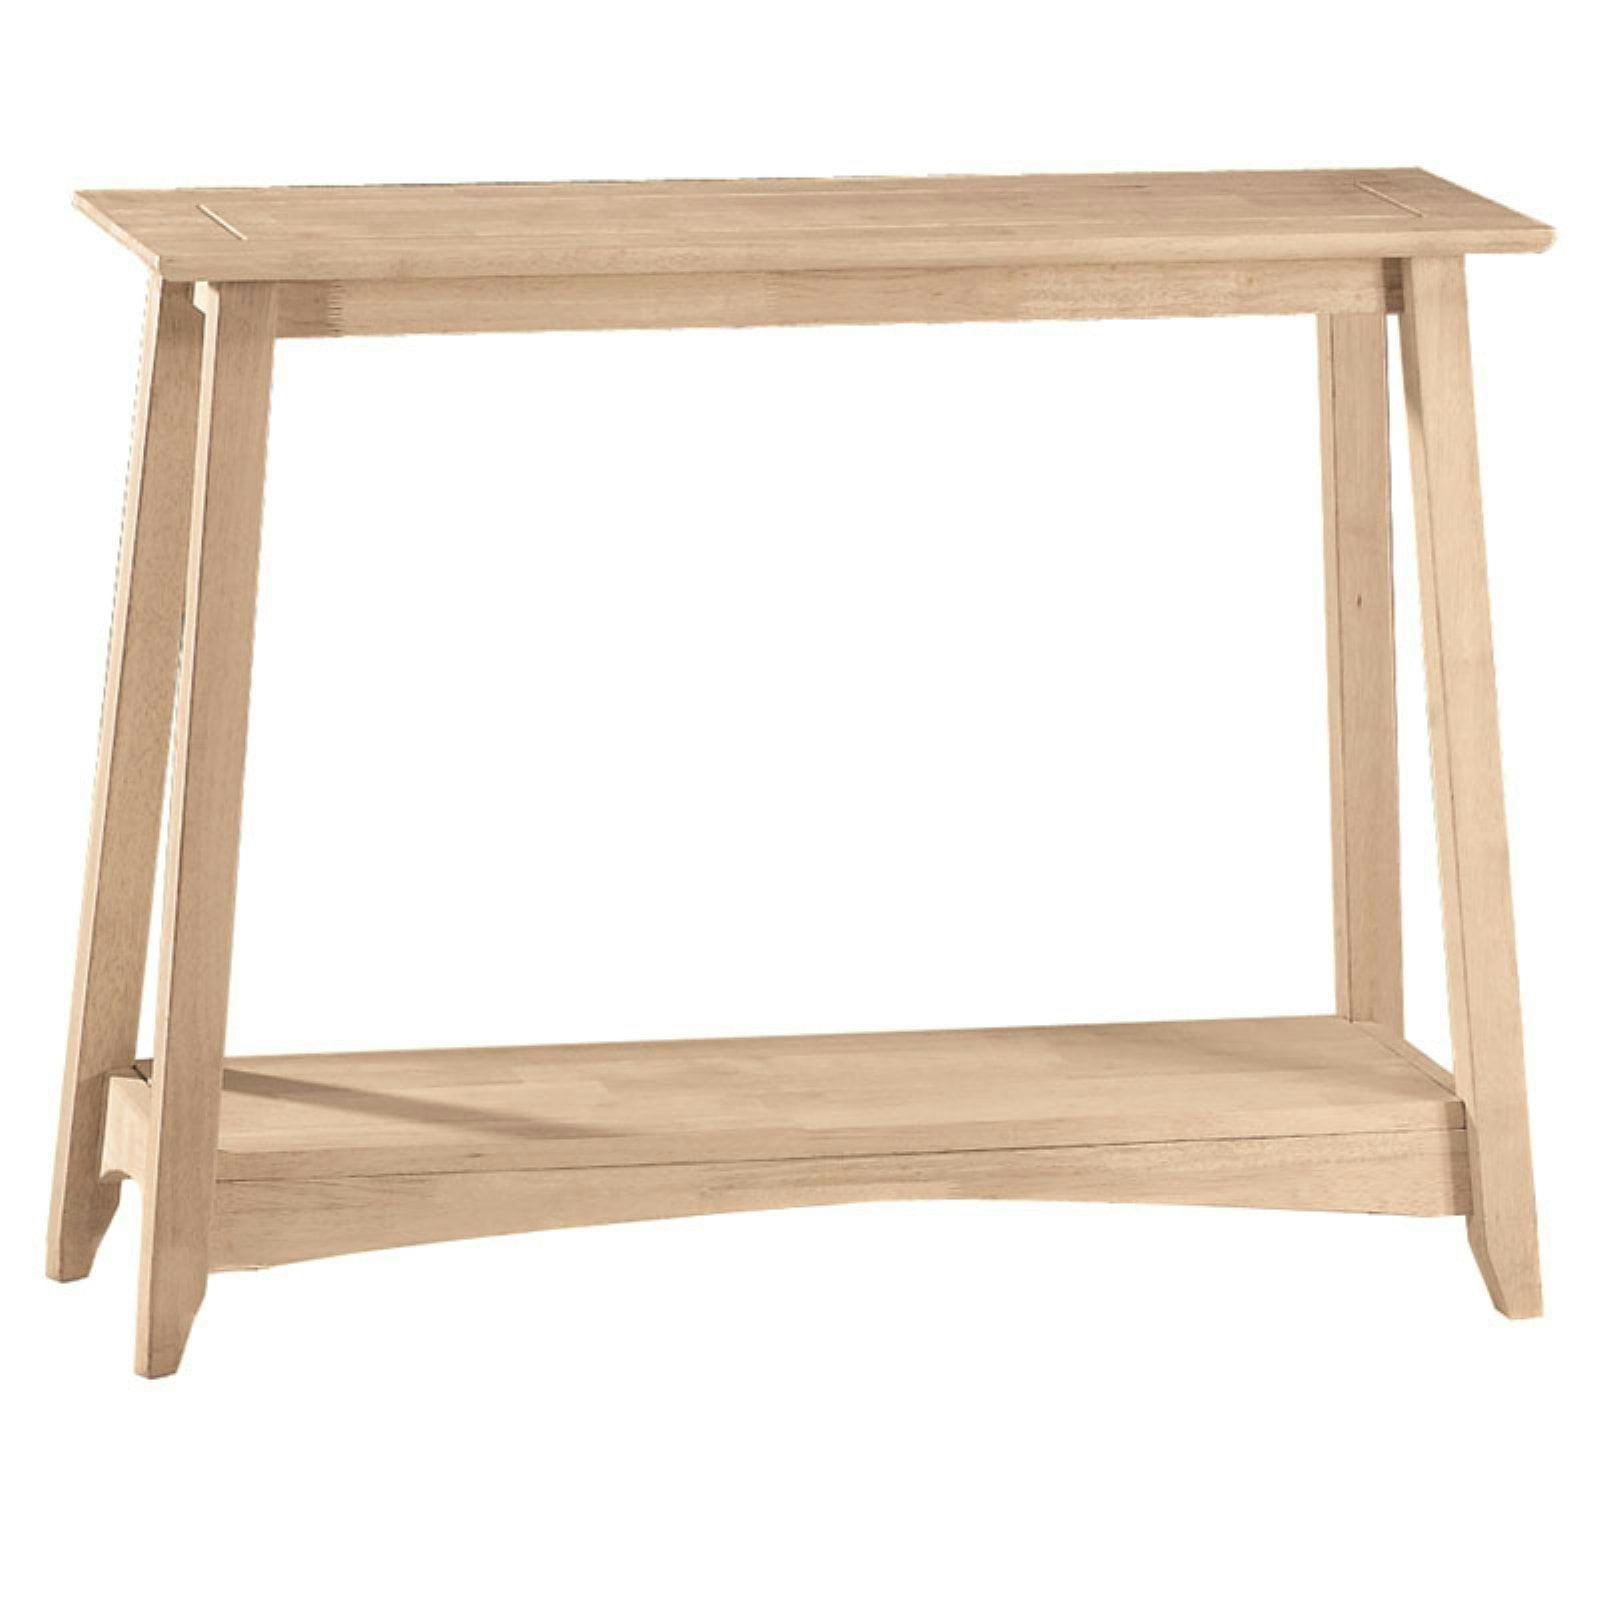 Customizable Solid Parawood Shaker Console Table with Storage Shelf